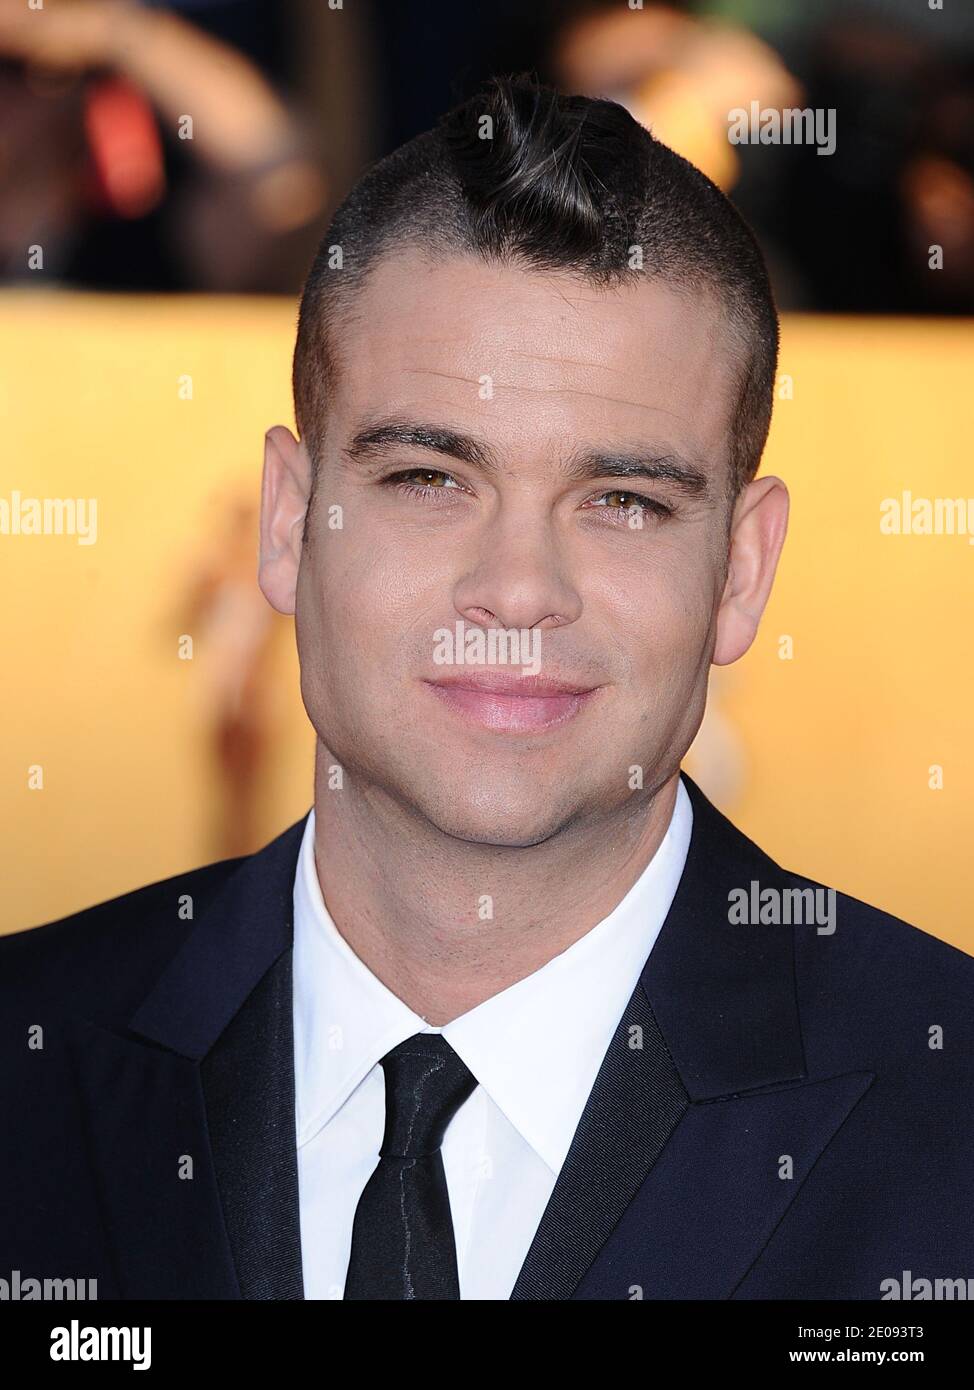 Mark Salling attending the 18th Annual Screen Actors Guild (SAG) Awards held at the Shrine Auditorium in Los Angeles, CA on January 29, 2012. Photo by Lionel Hahn/ABACAPRESS.COM Stock Photo